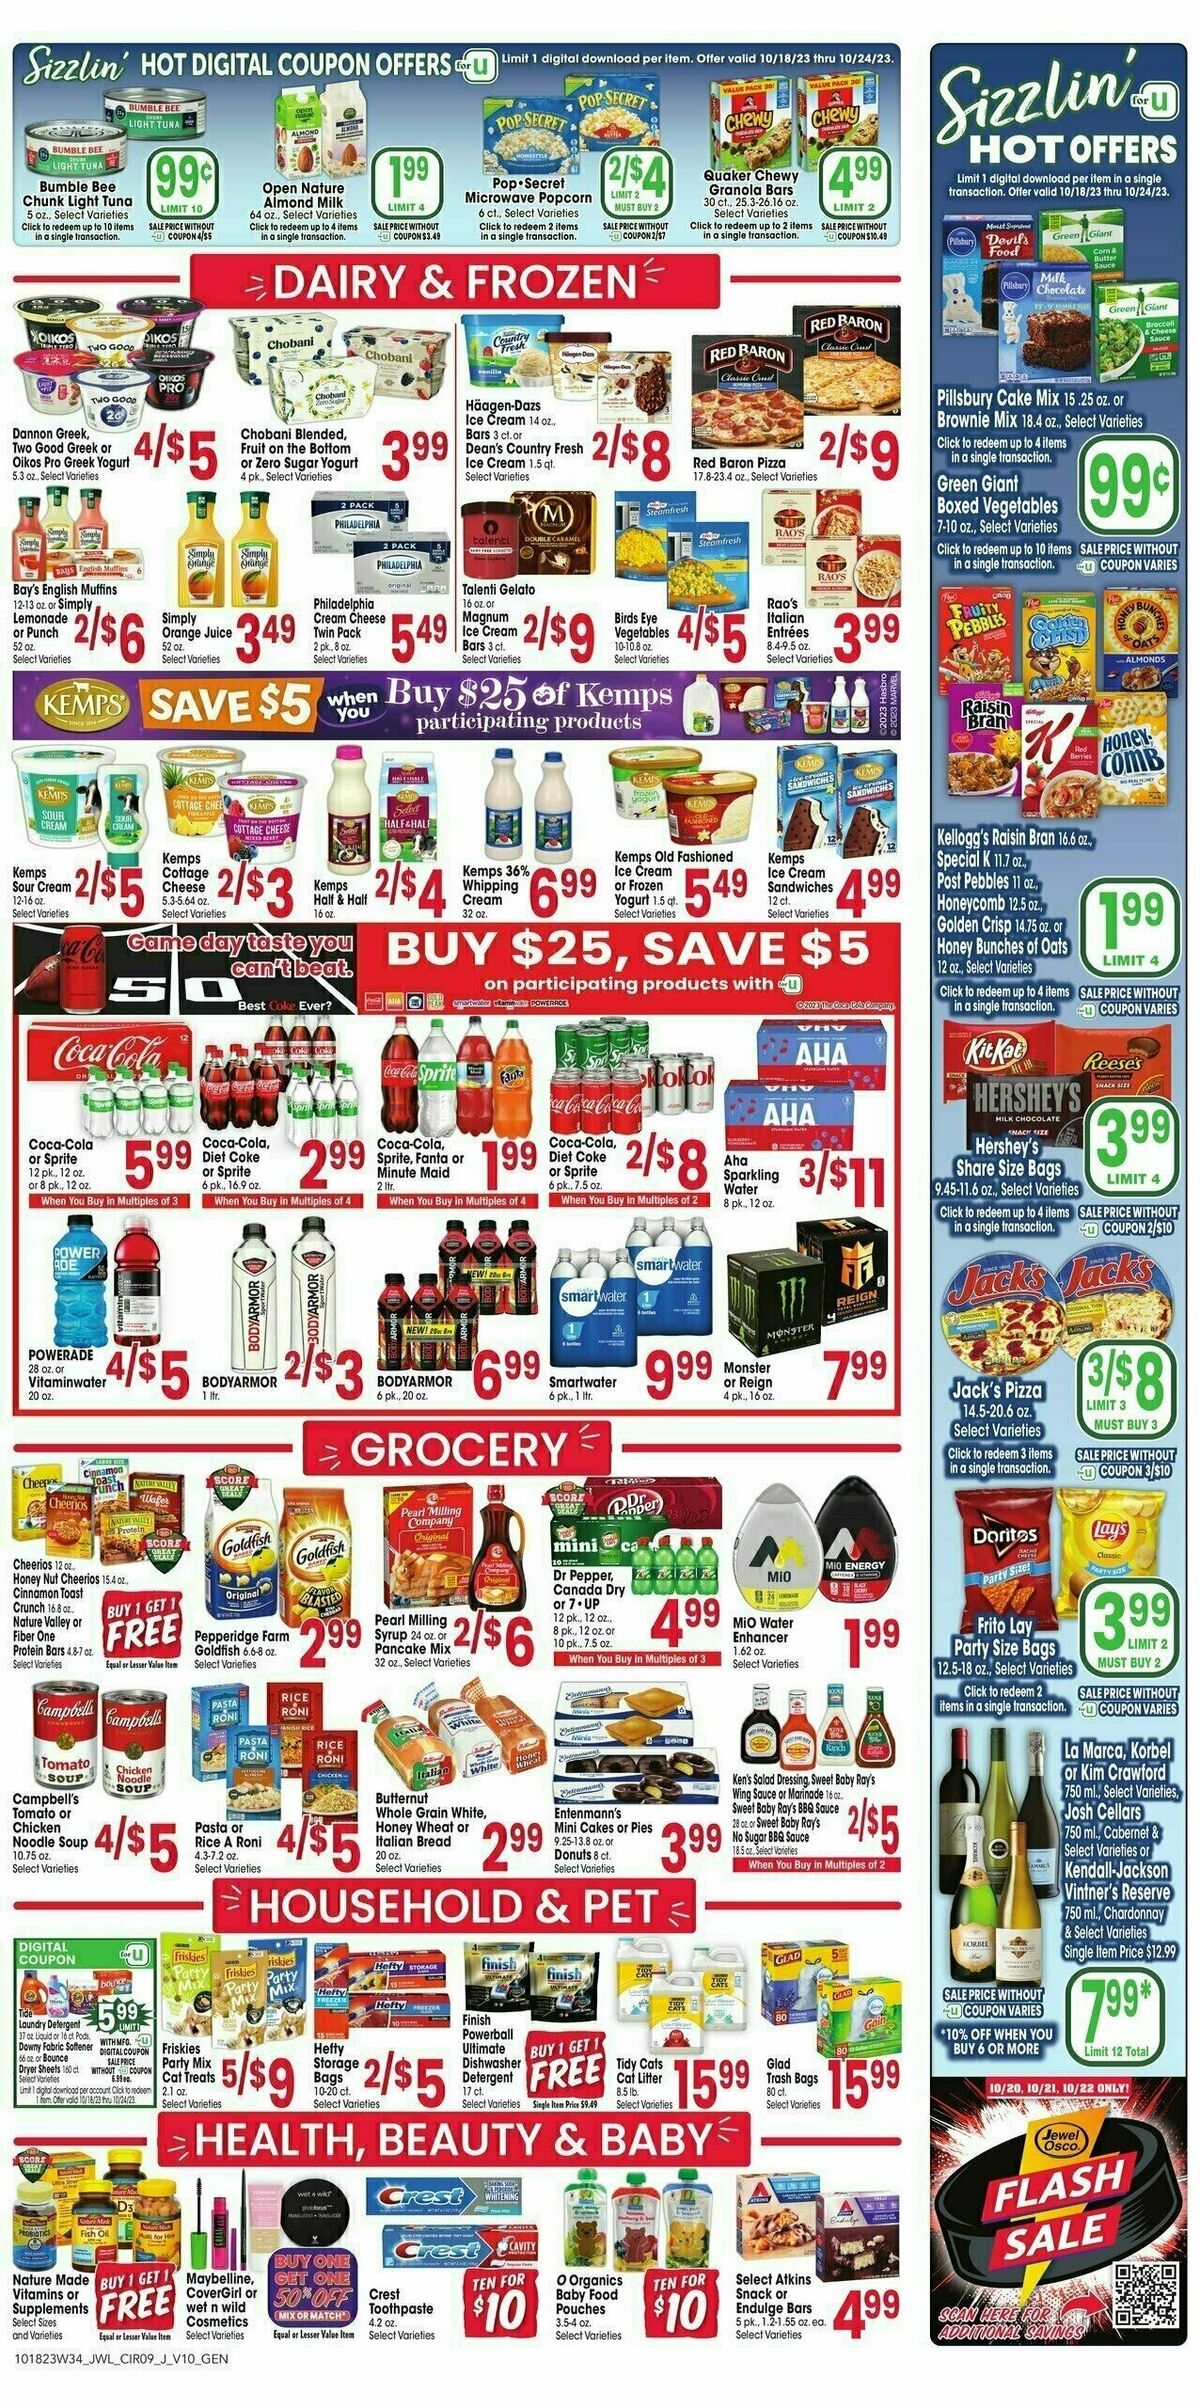 Jewel Osco Weekly Ad from October 18